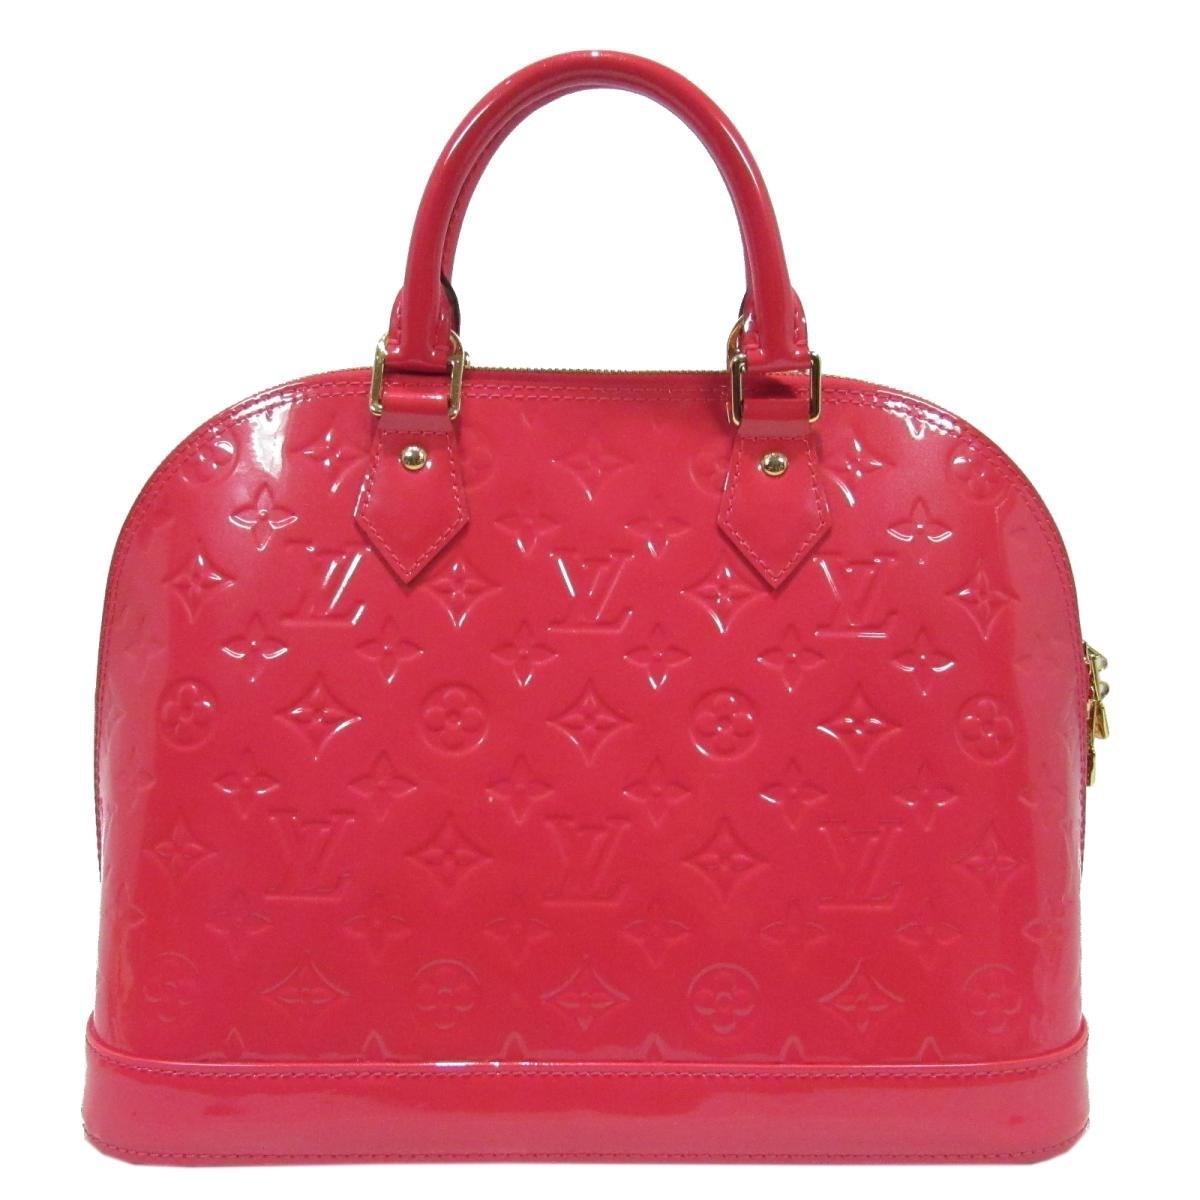 Louis Vuitton Authentic Alma Pm Hand Bag Vernis Hot Pink Used Vintage M90974 in Pink - Lyst